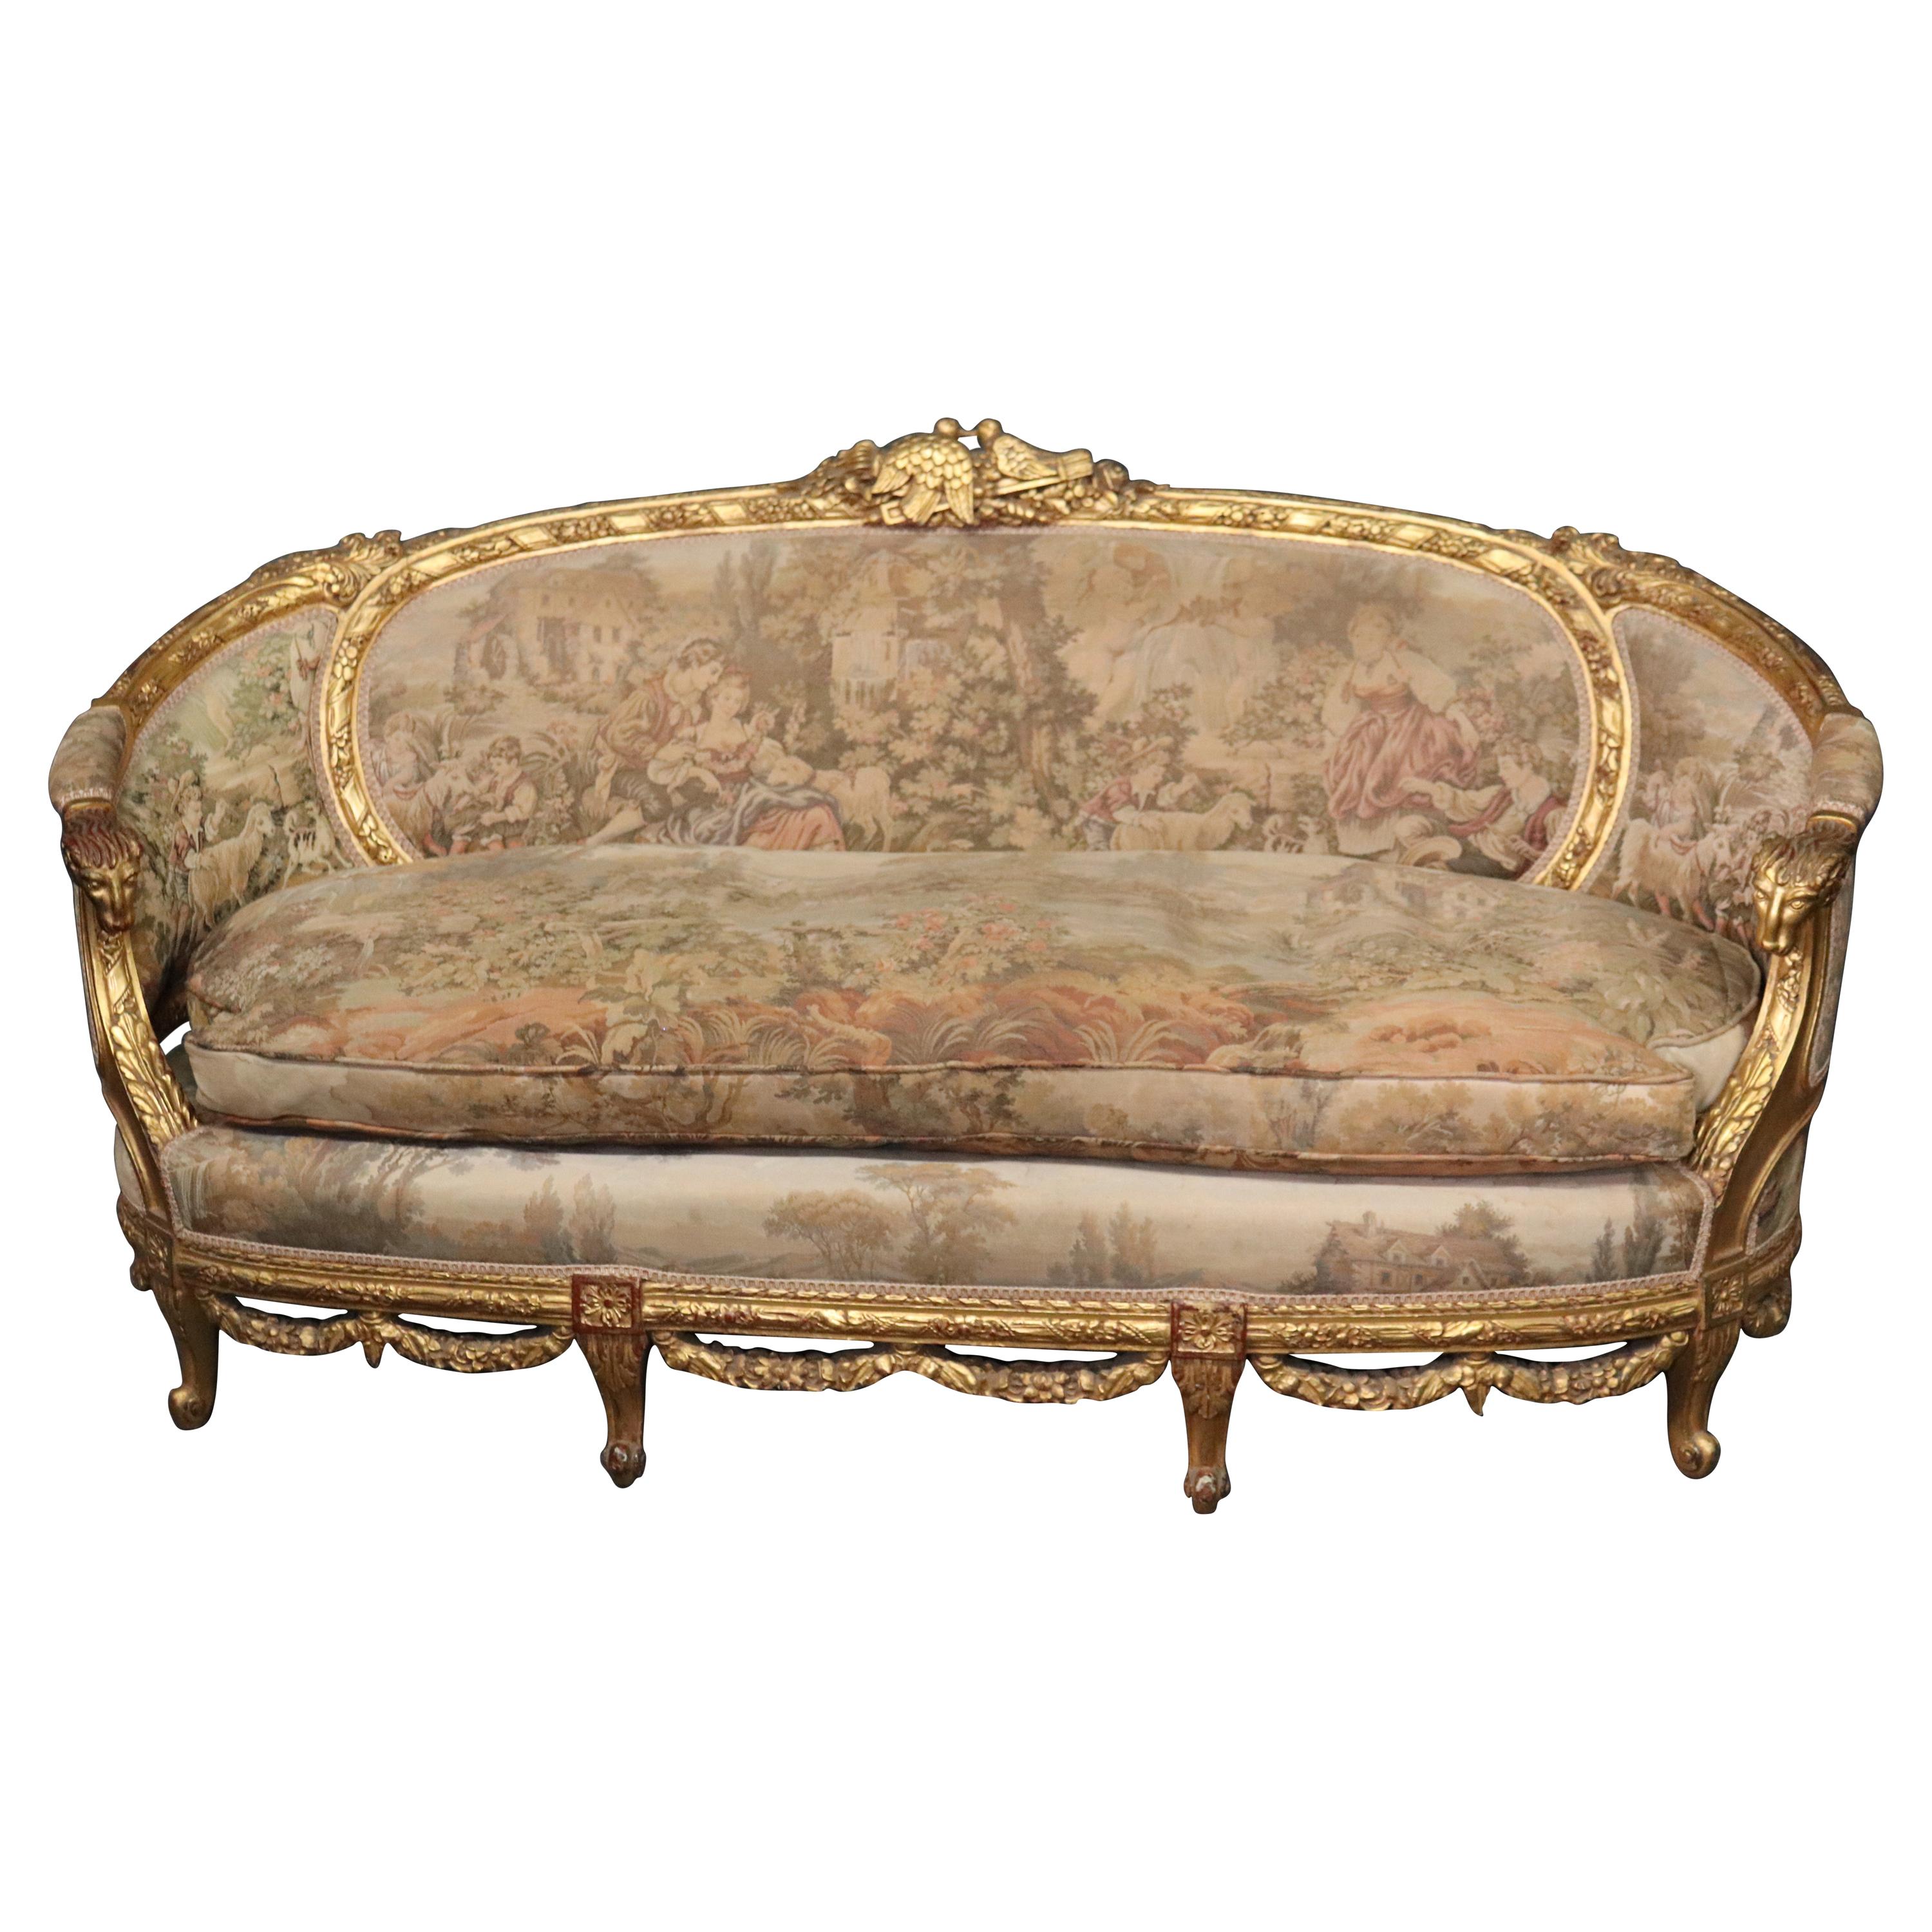 Carved Curved Back French Louis XV Gilded Rams Head and Lovebirds Sofa Settee